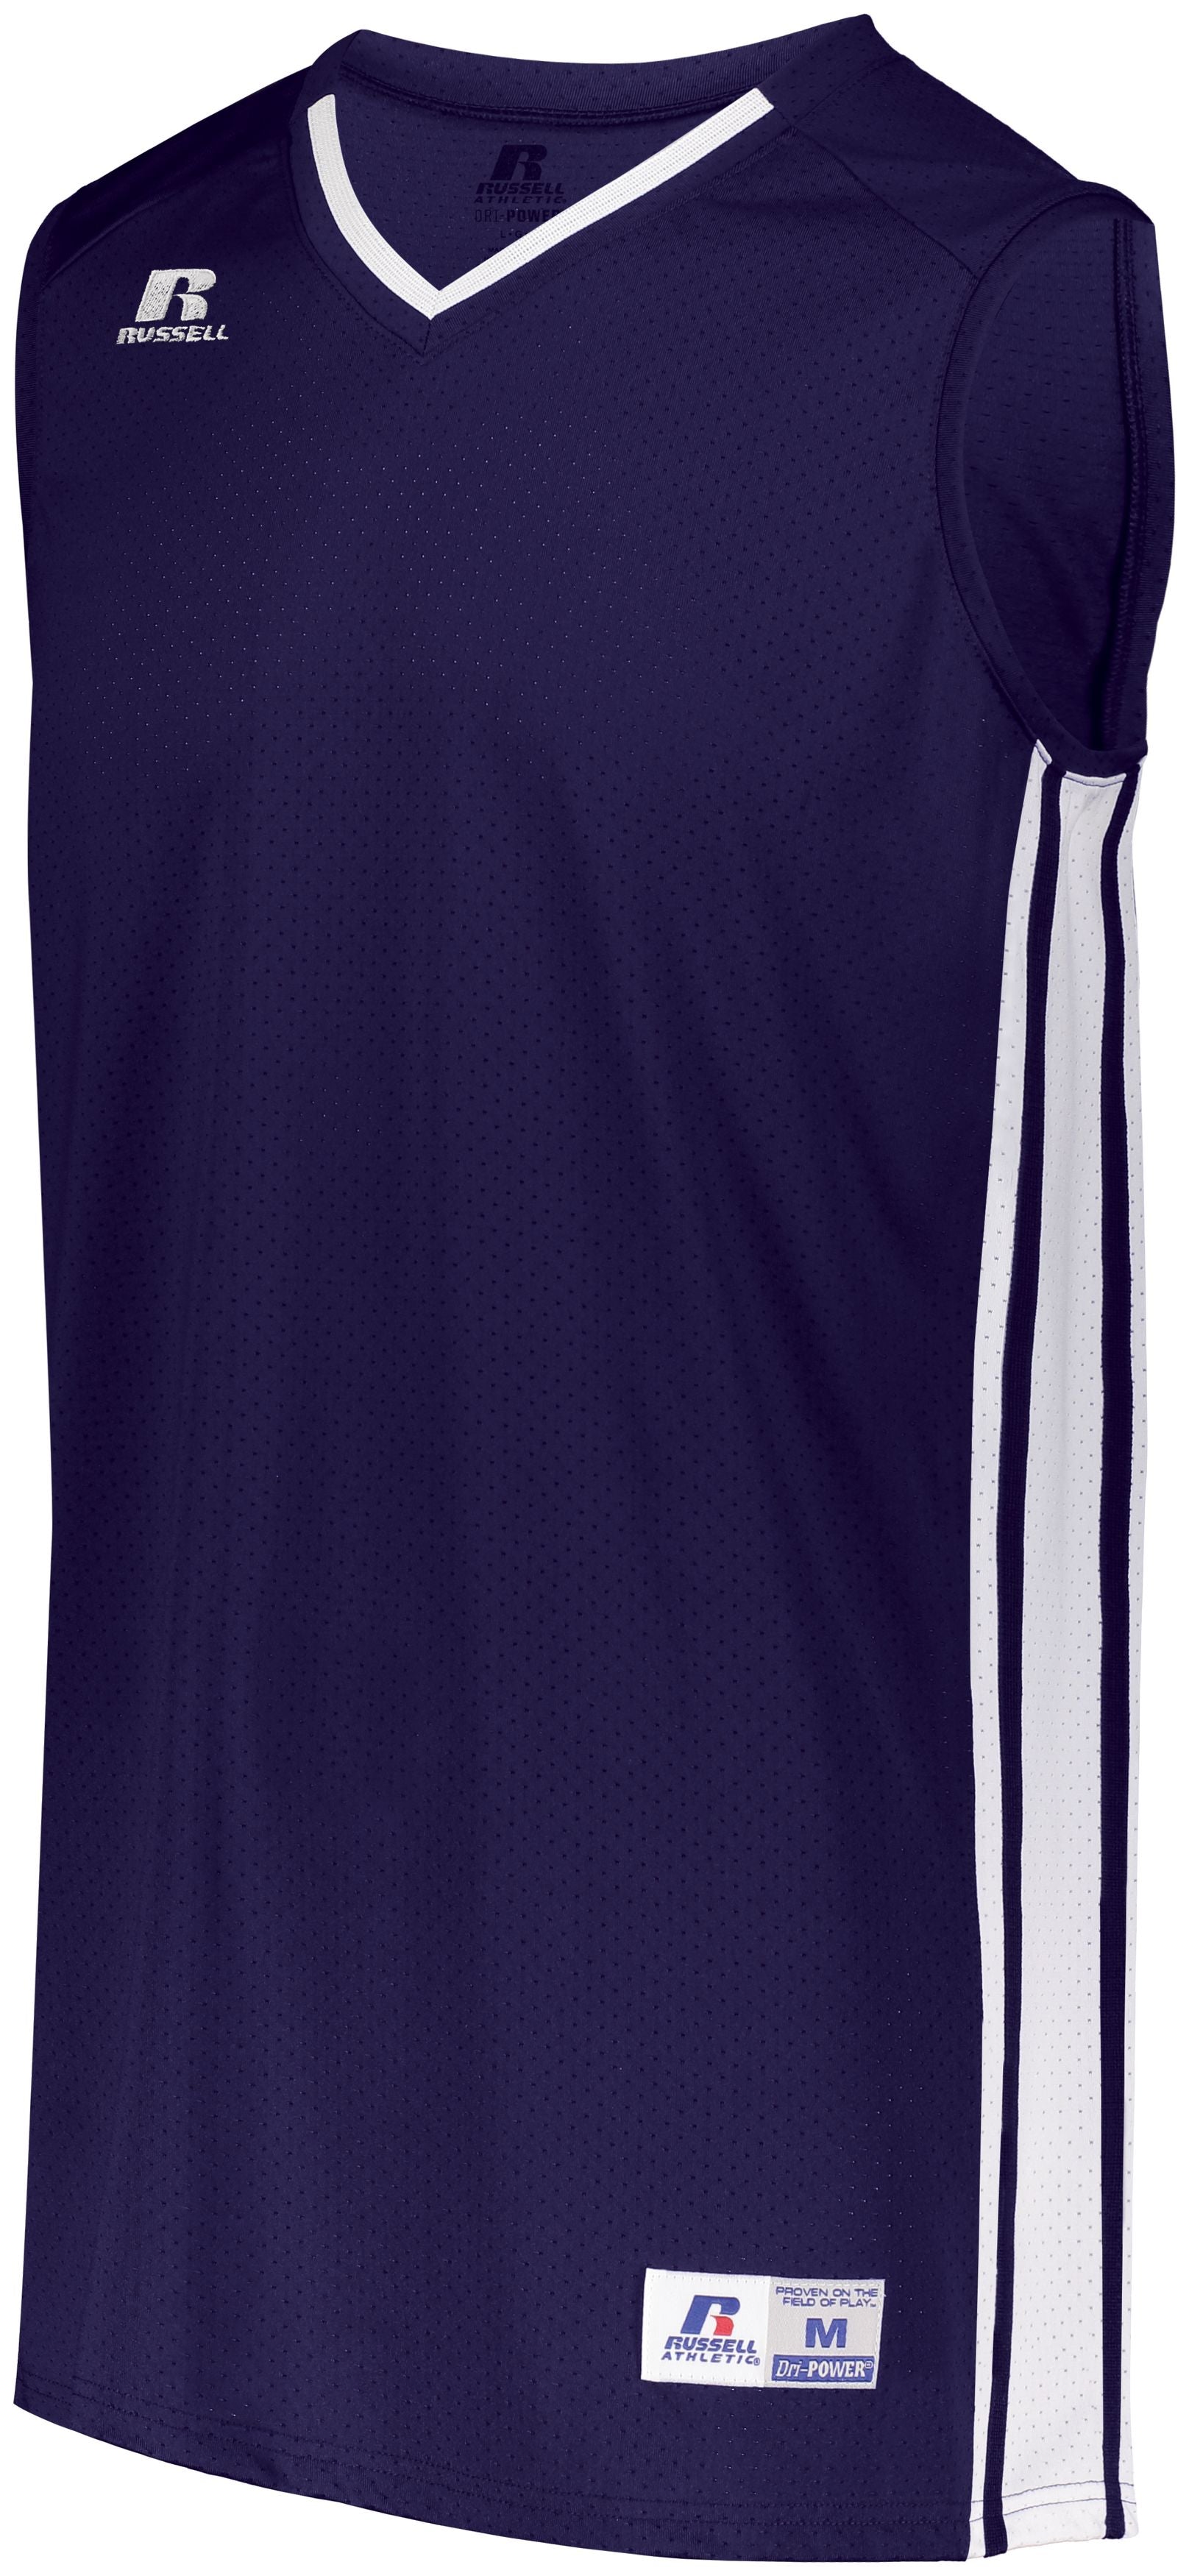 Russell Athletic Legacy Basketball Jersey in Purple/White  -Part of the Adult, Adult-Jersey, Basketball, Russell-Athletic-Products, Shirts, All-Sports, All-Sports-1 product lines at KanaleyCreations.com